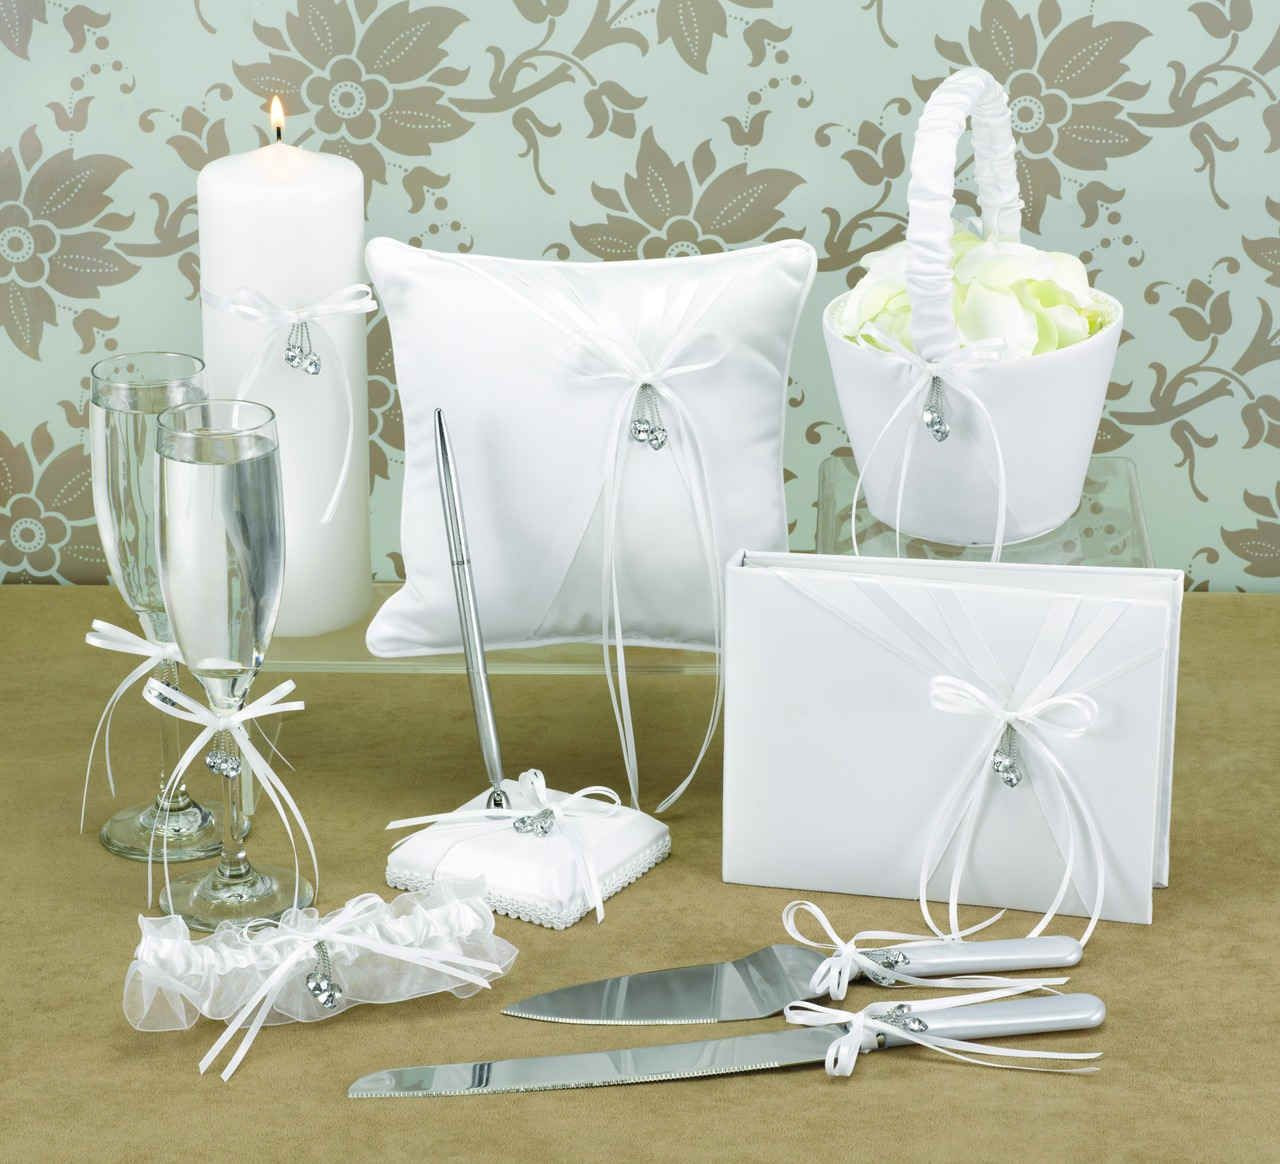 Wedding Guest Book Sets Cheap
 A pair of heart crystals dangle from the bow of this